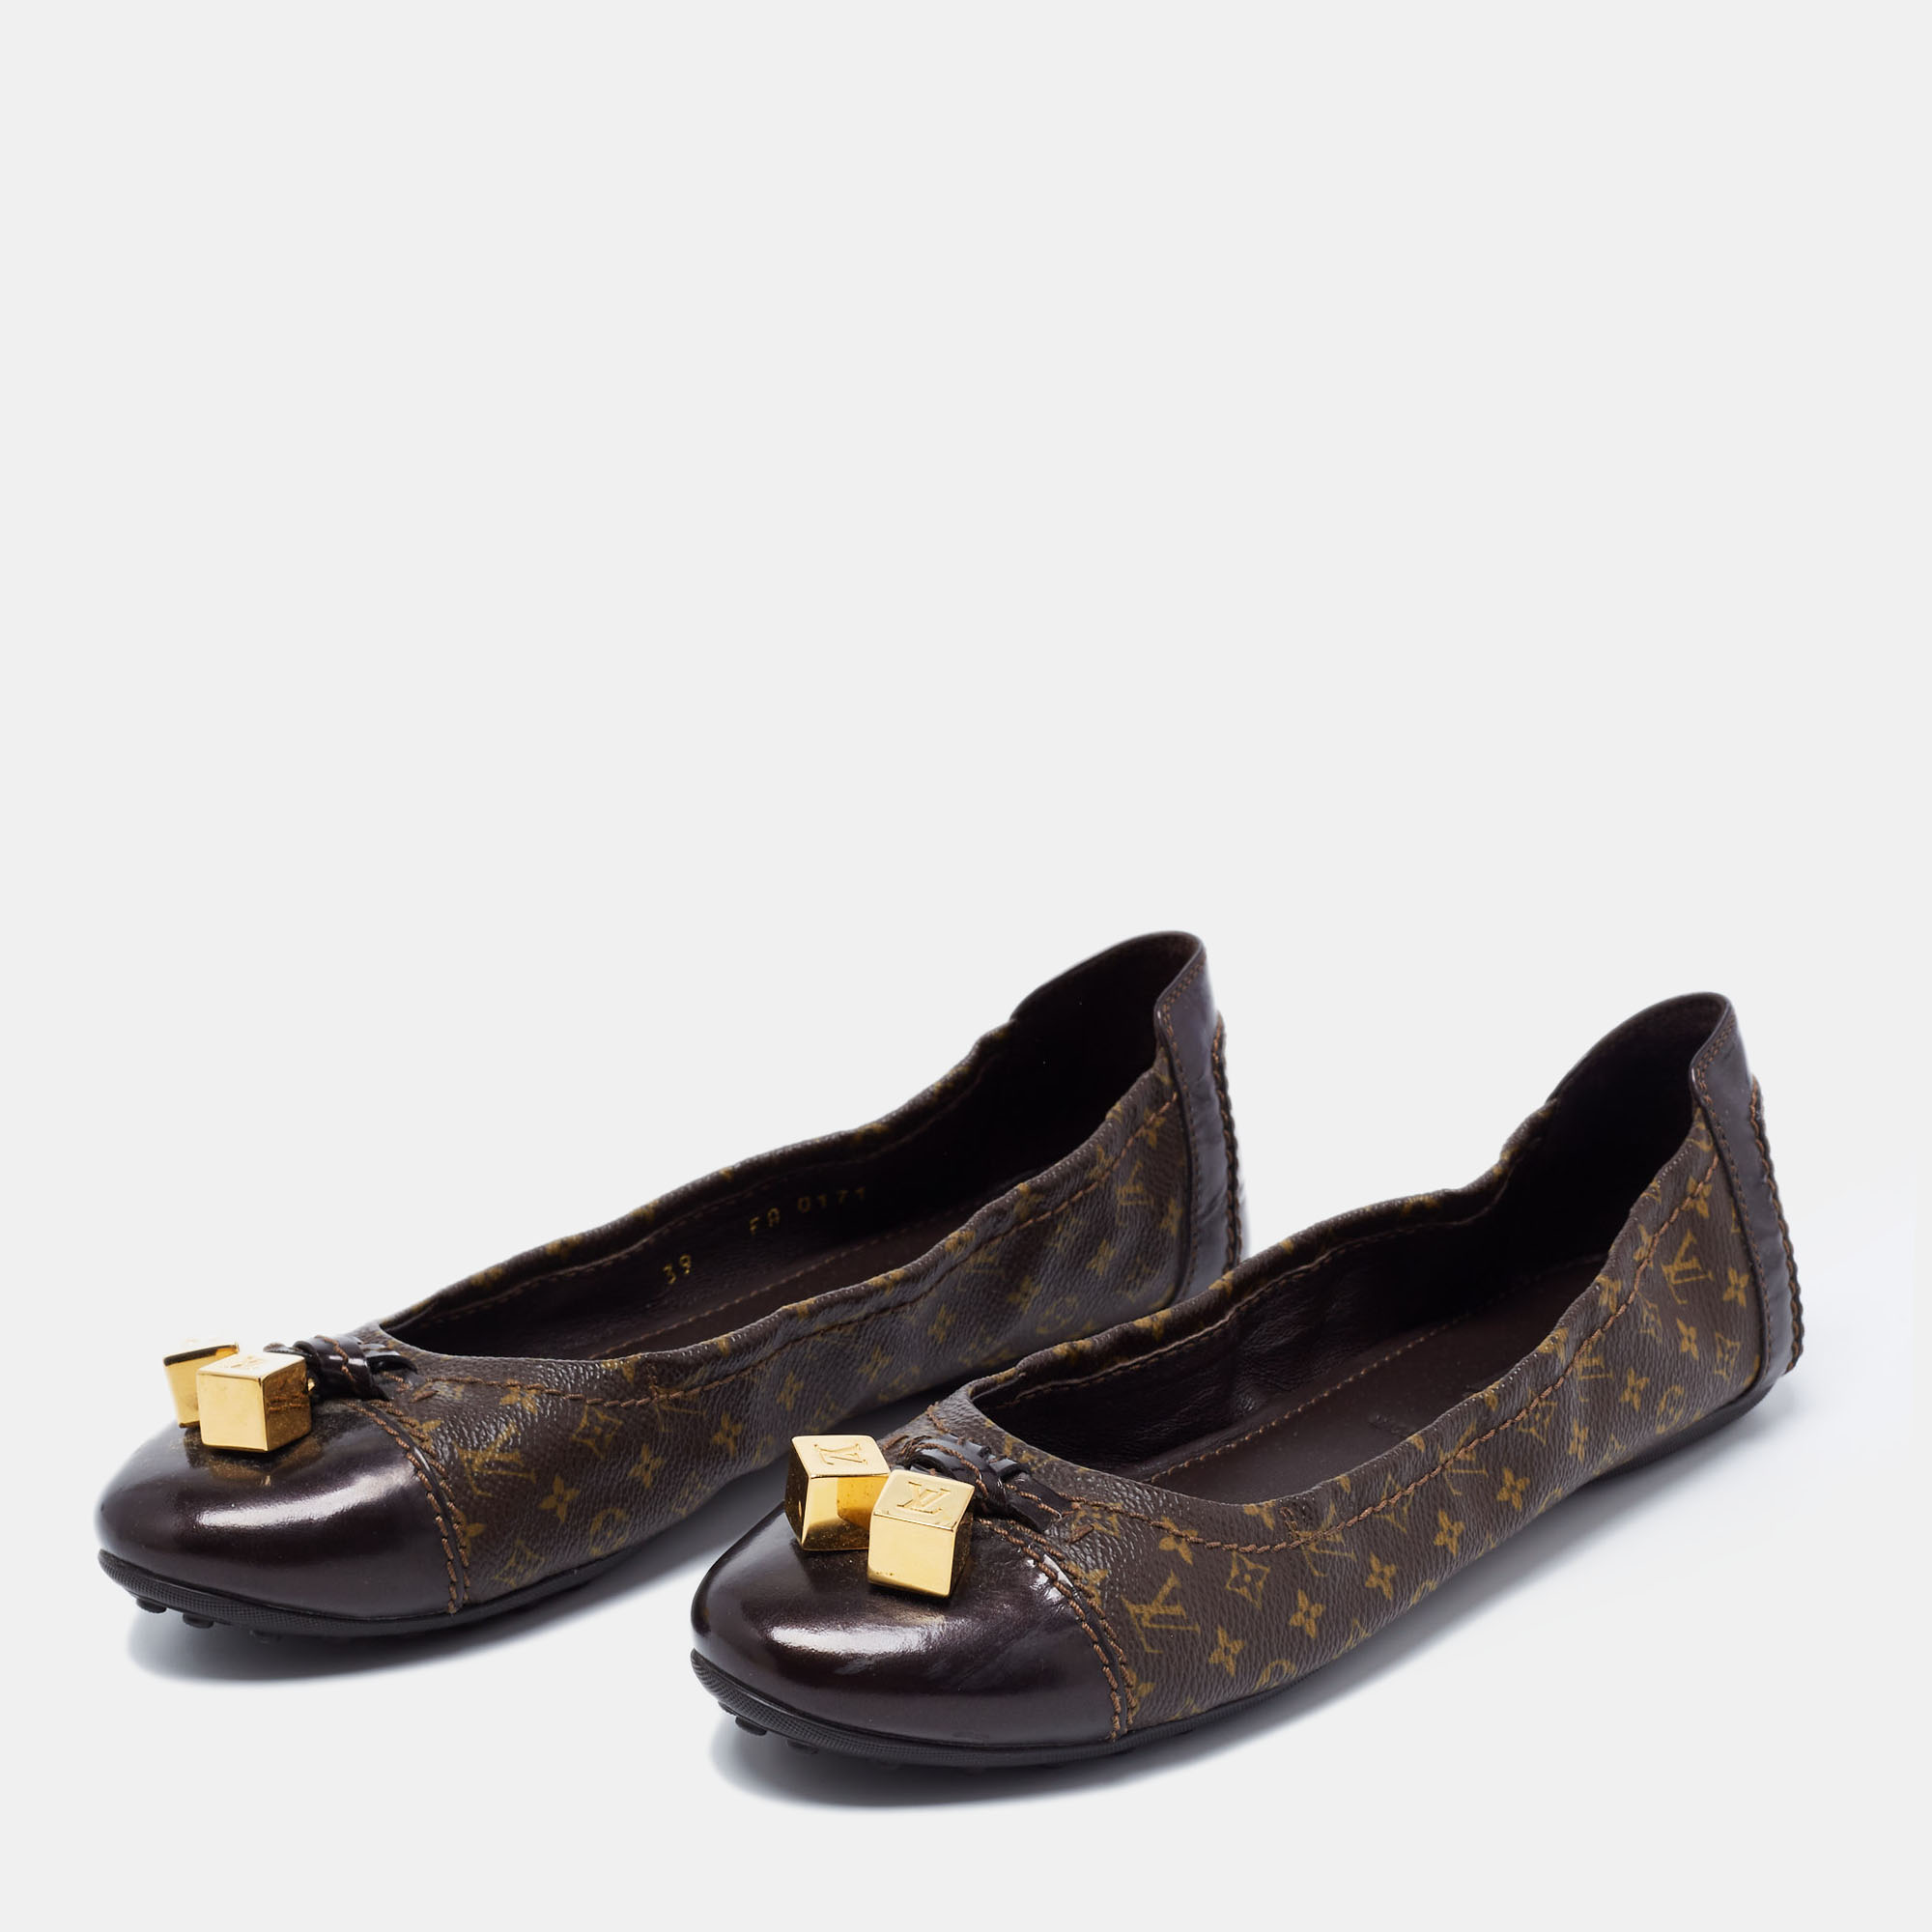 

Louis Vuitton Monogram Canvas and Patent Leather Cap Toe Lovely Scrunch Ballet Flats Size, Brown